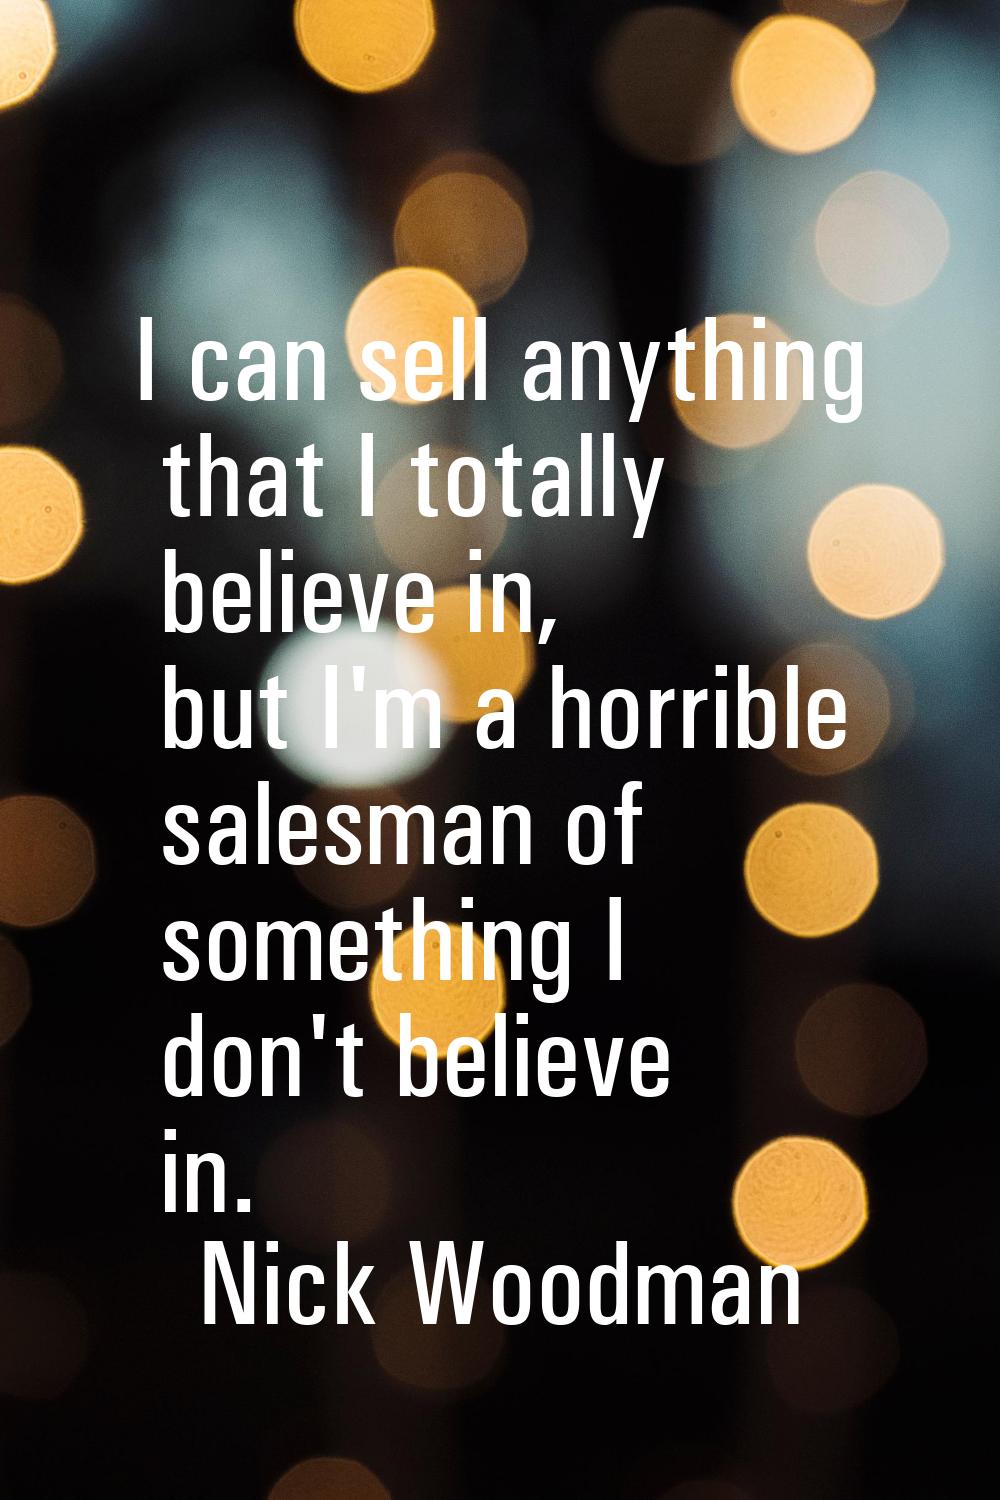 I can sell anything that I totally believe in, but I'm a horrible salesman of something I don't bel